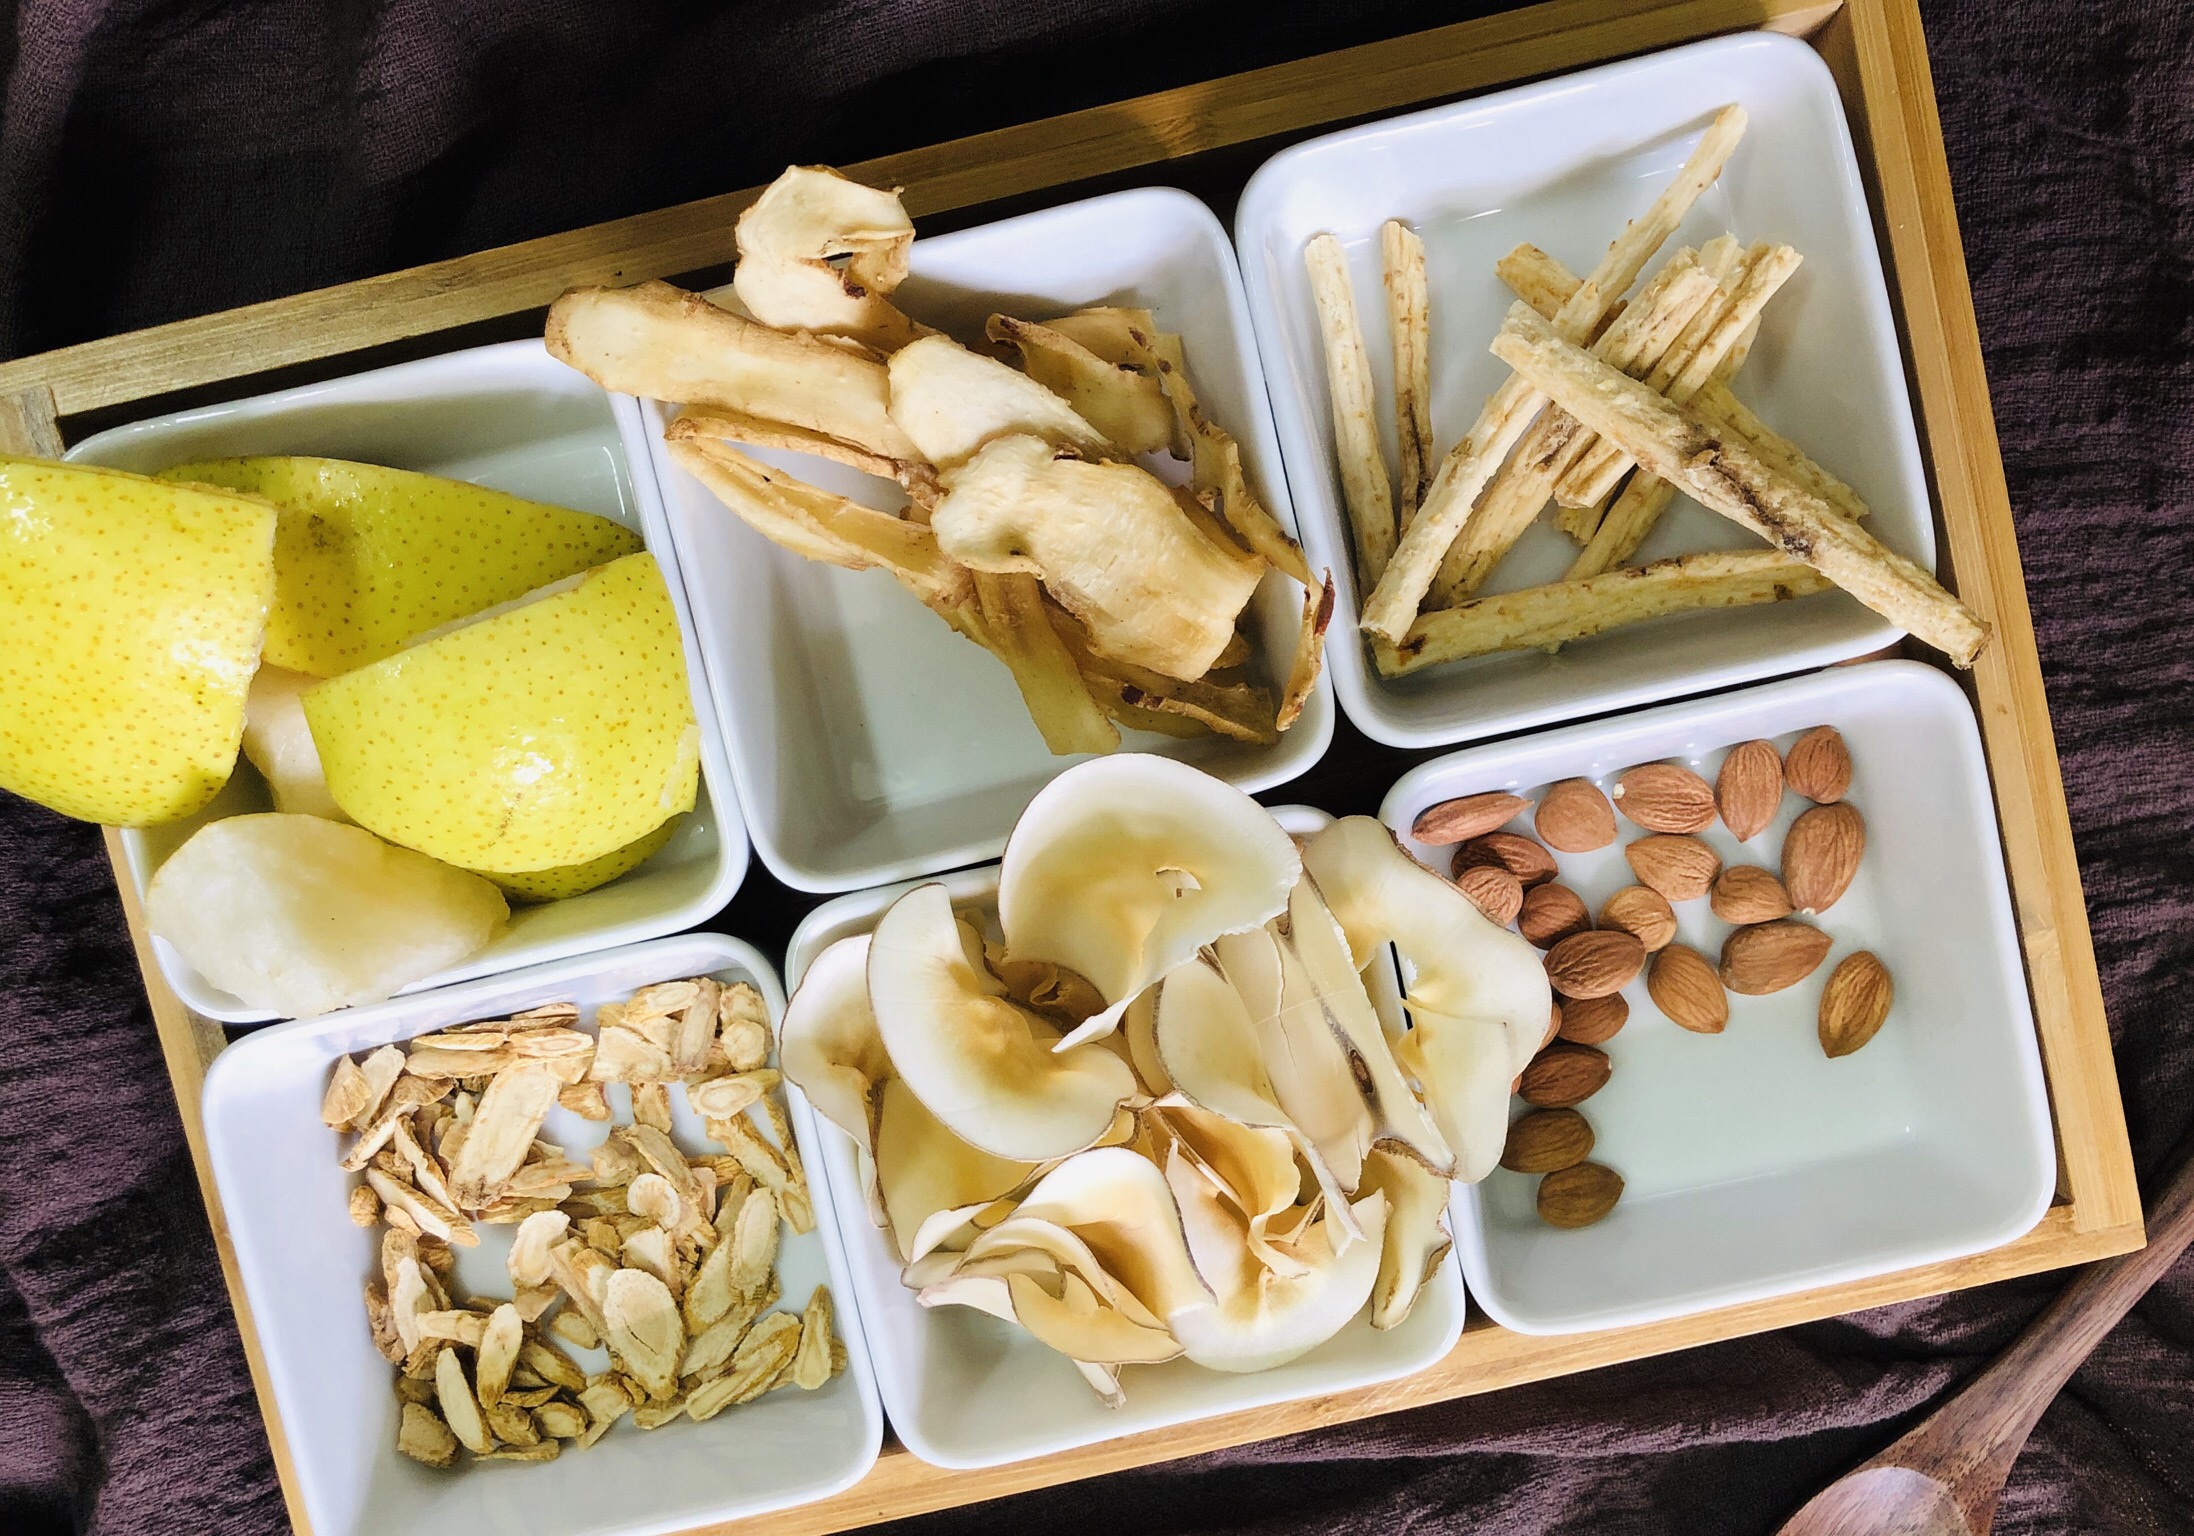 
Shang Fang of exclusive traditional Chinese medical science | Qiu Dong relieves a cough soup of pear of embellish lung snow, I what be afraid of cough am decisive the practice that collect